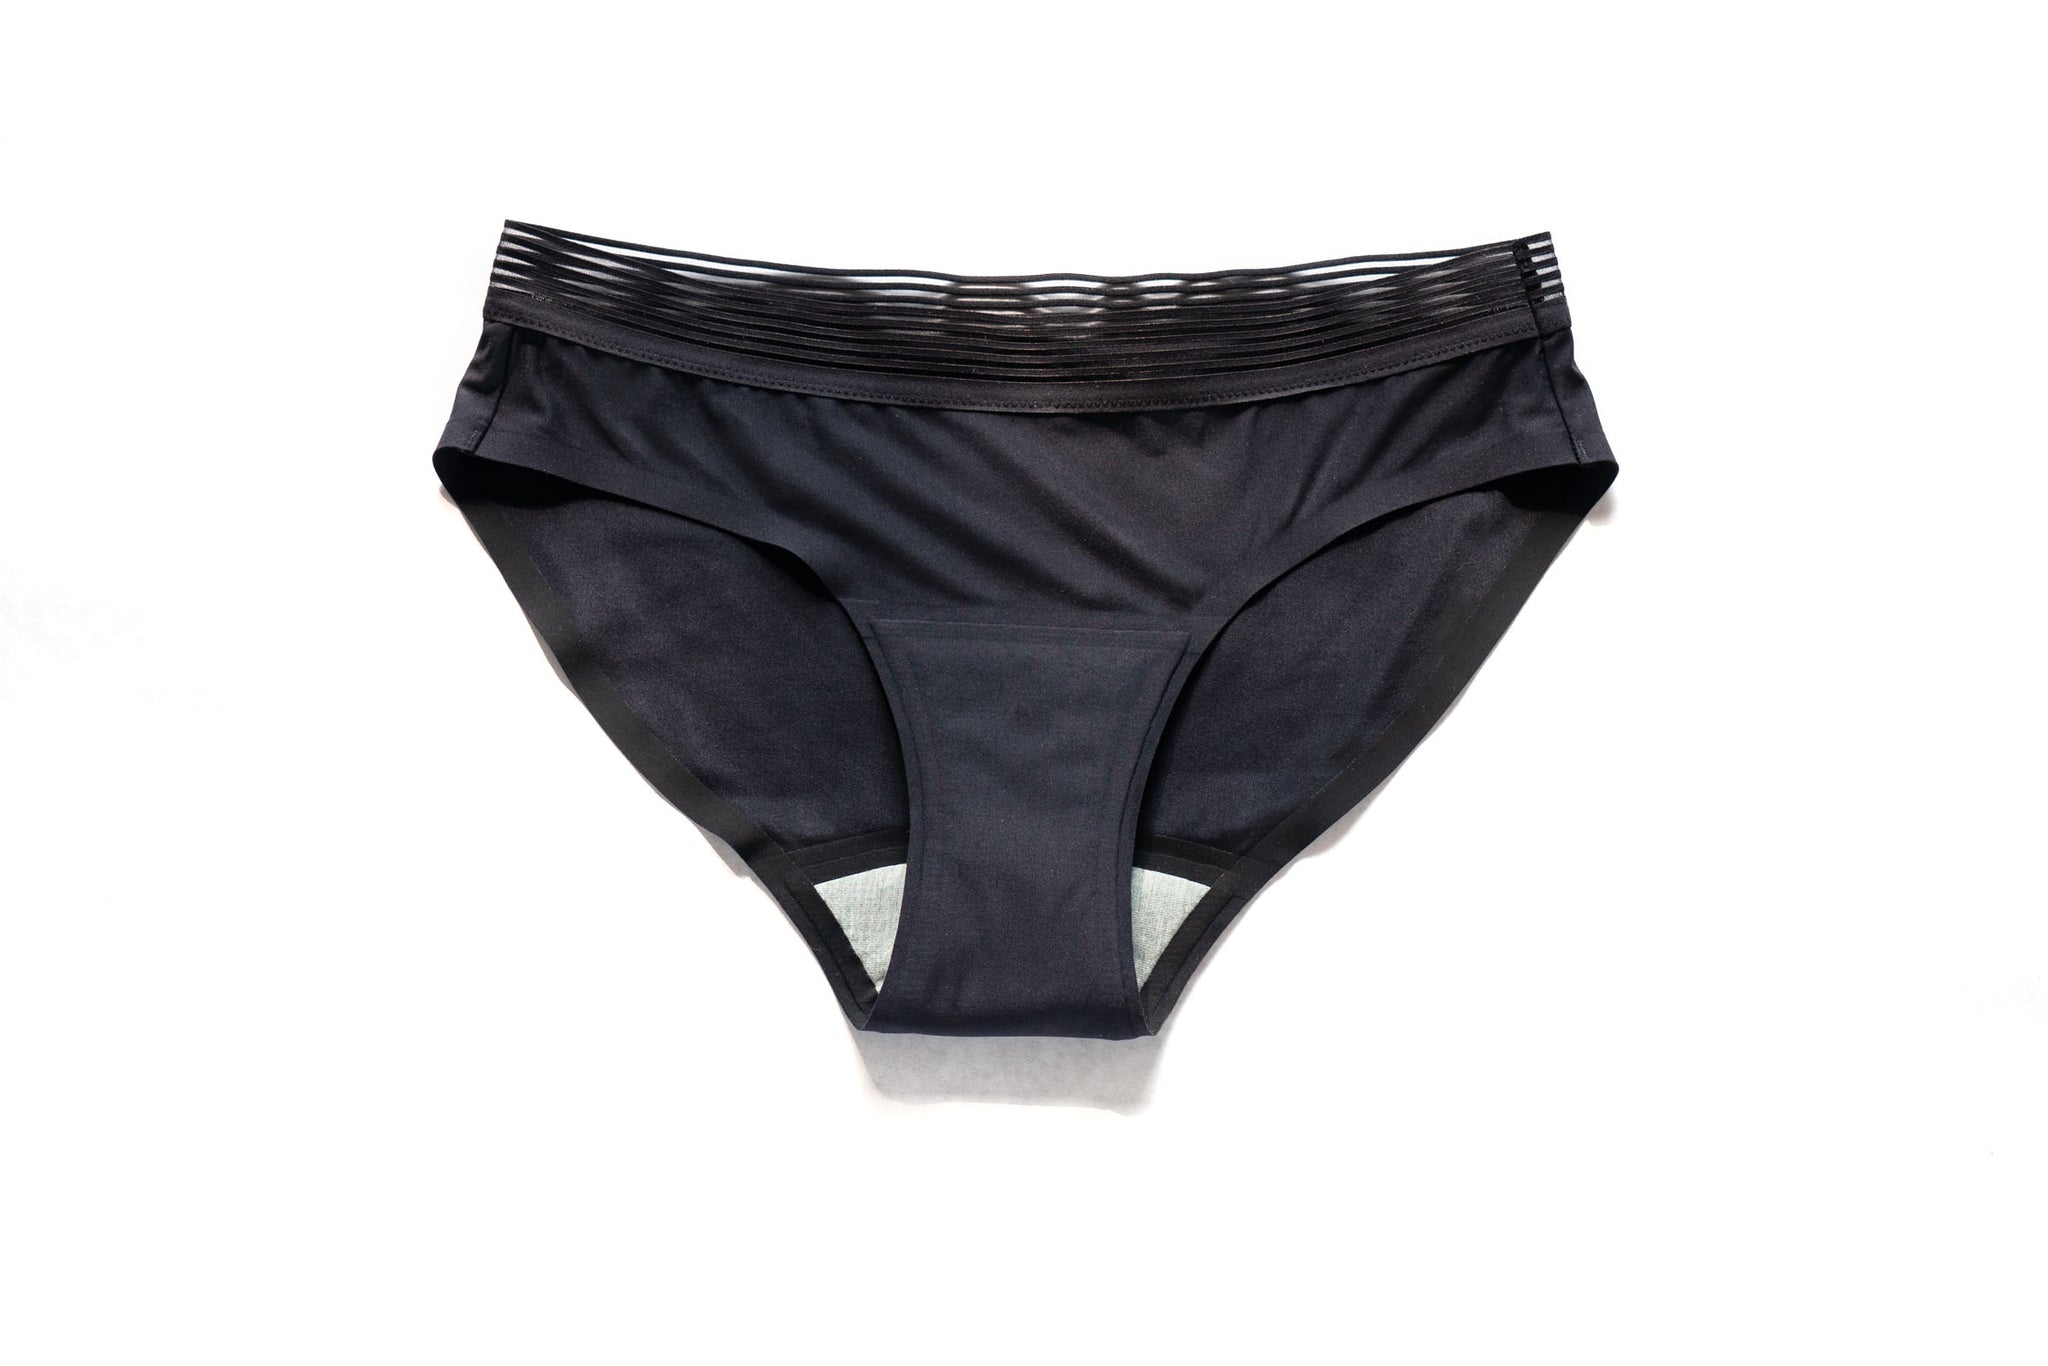 What Is the Best Underwear for Incontinence? - ONDR